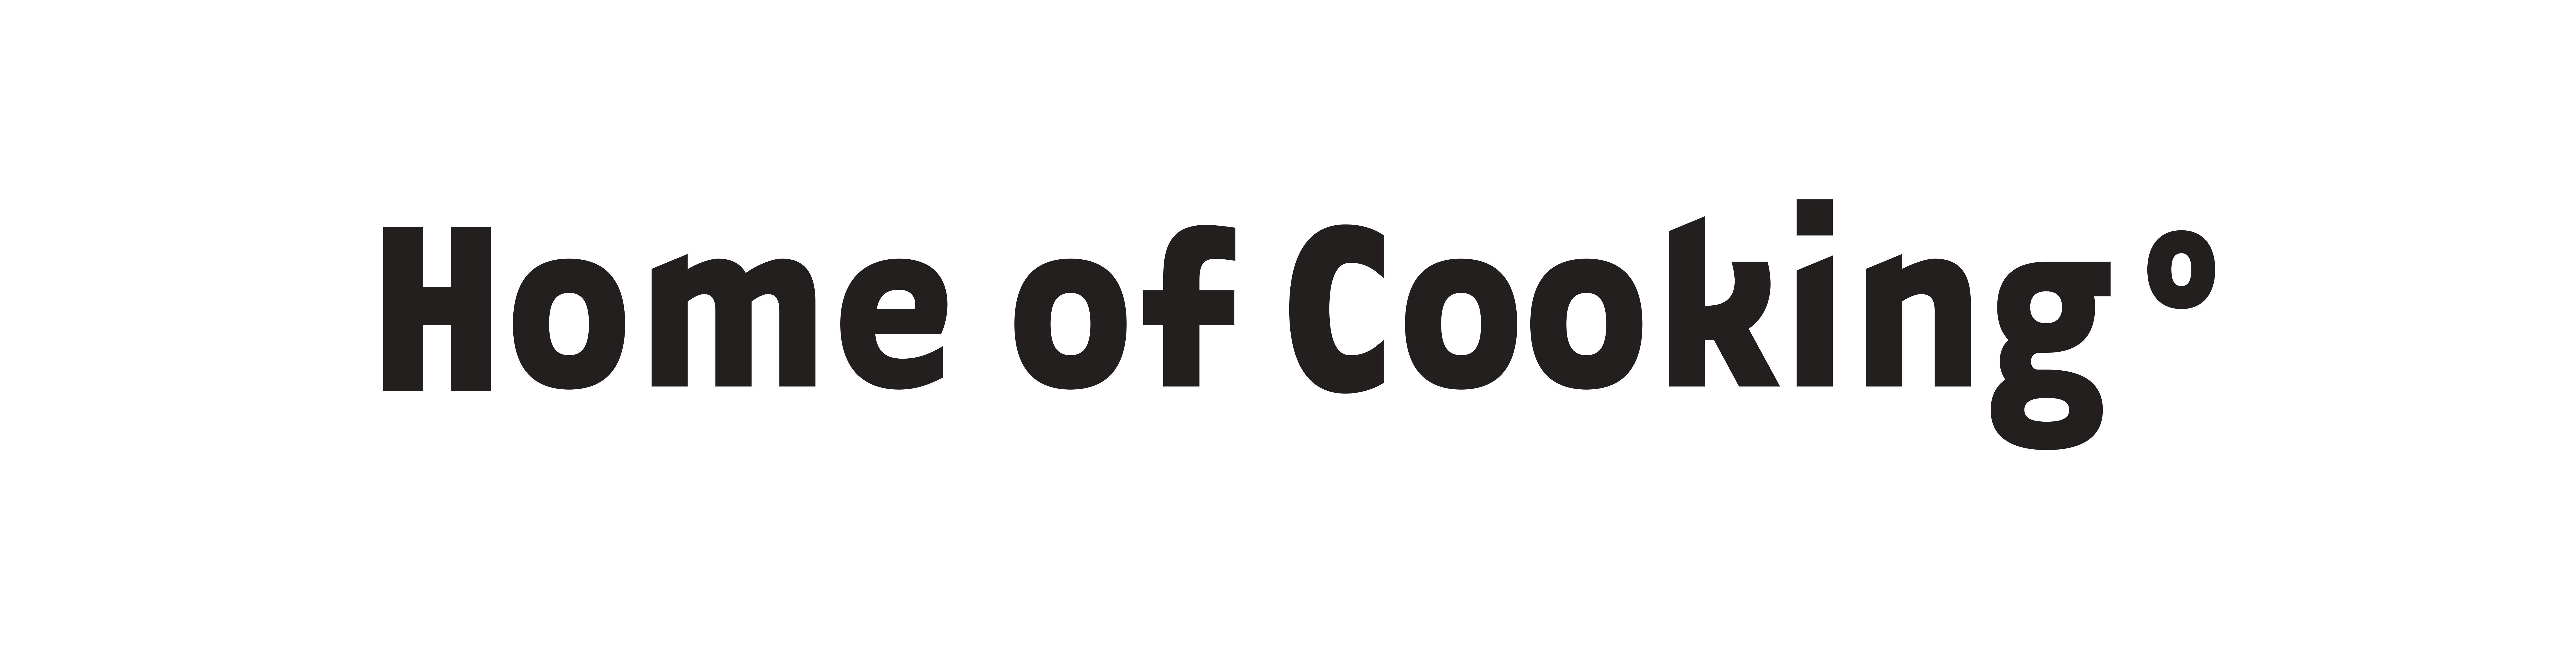 Cooking.com Logo - International Home Of Cooking